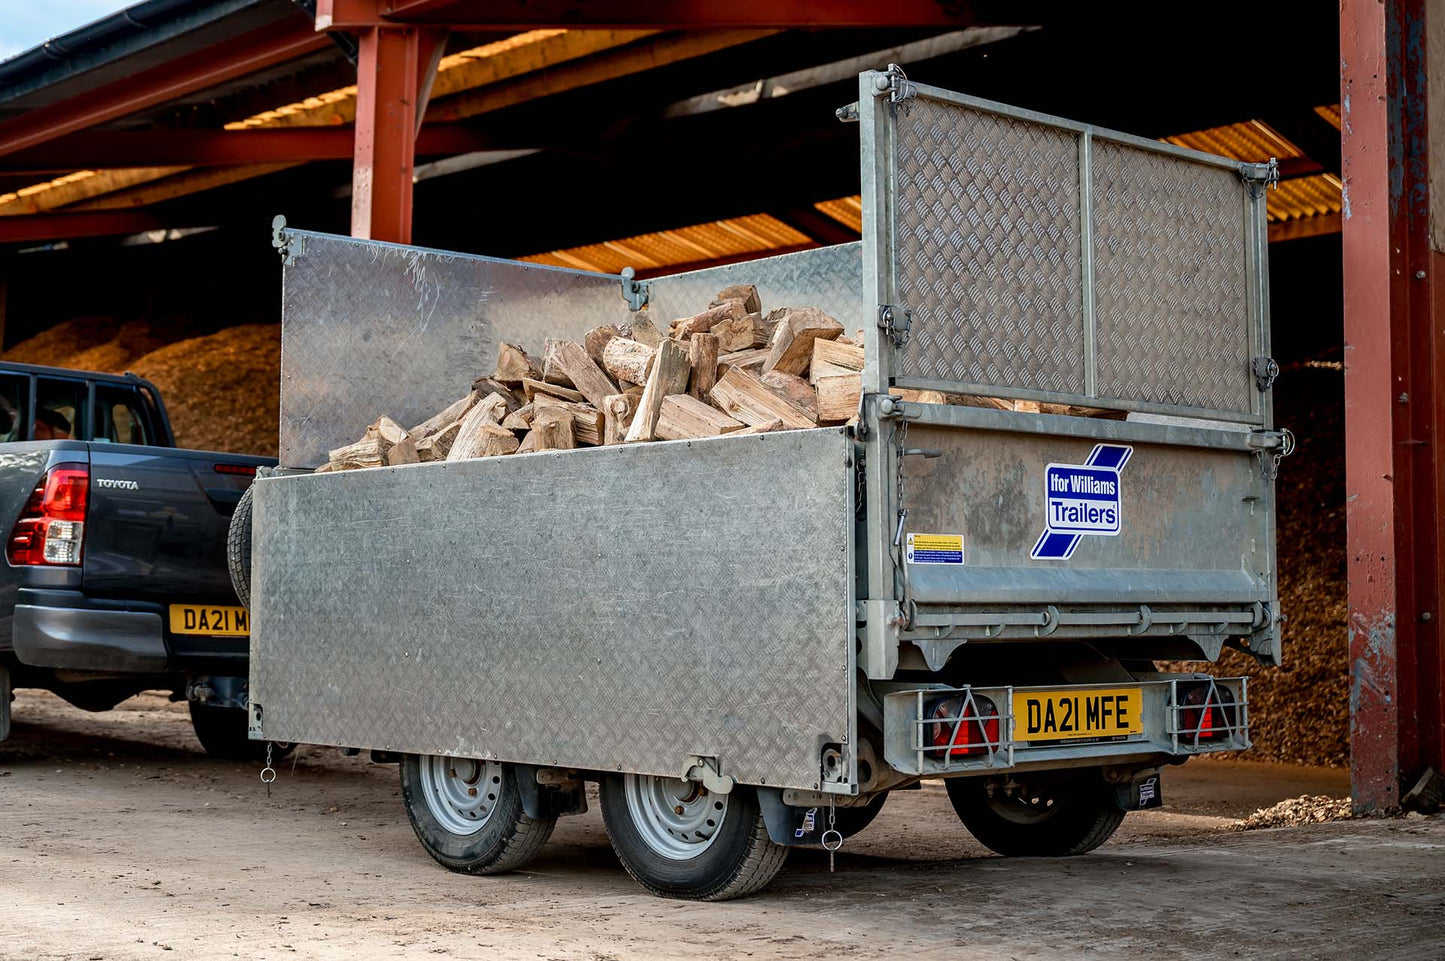 Full load mixed hardwood and softwood